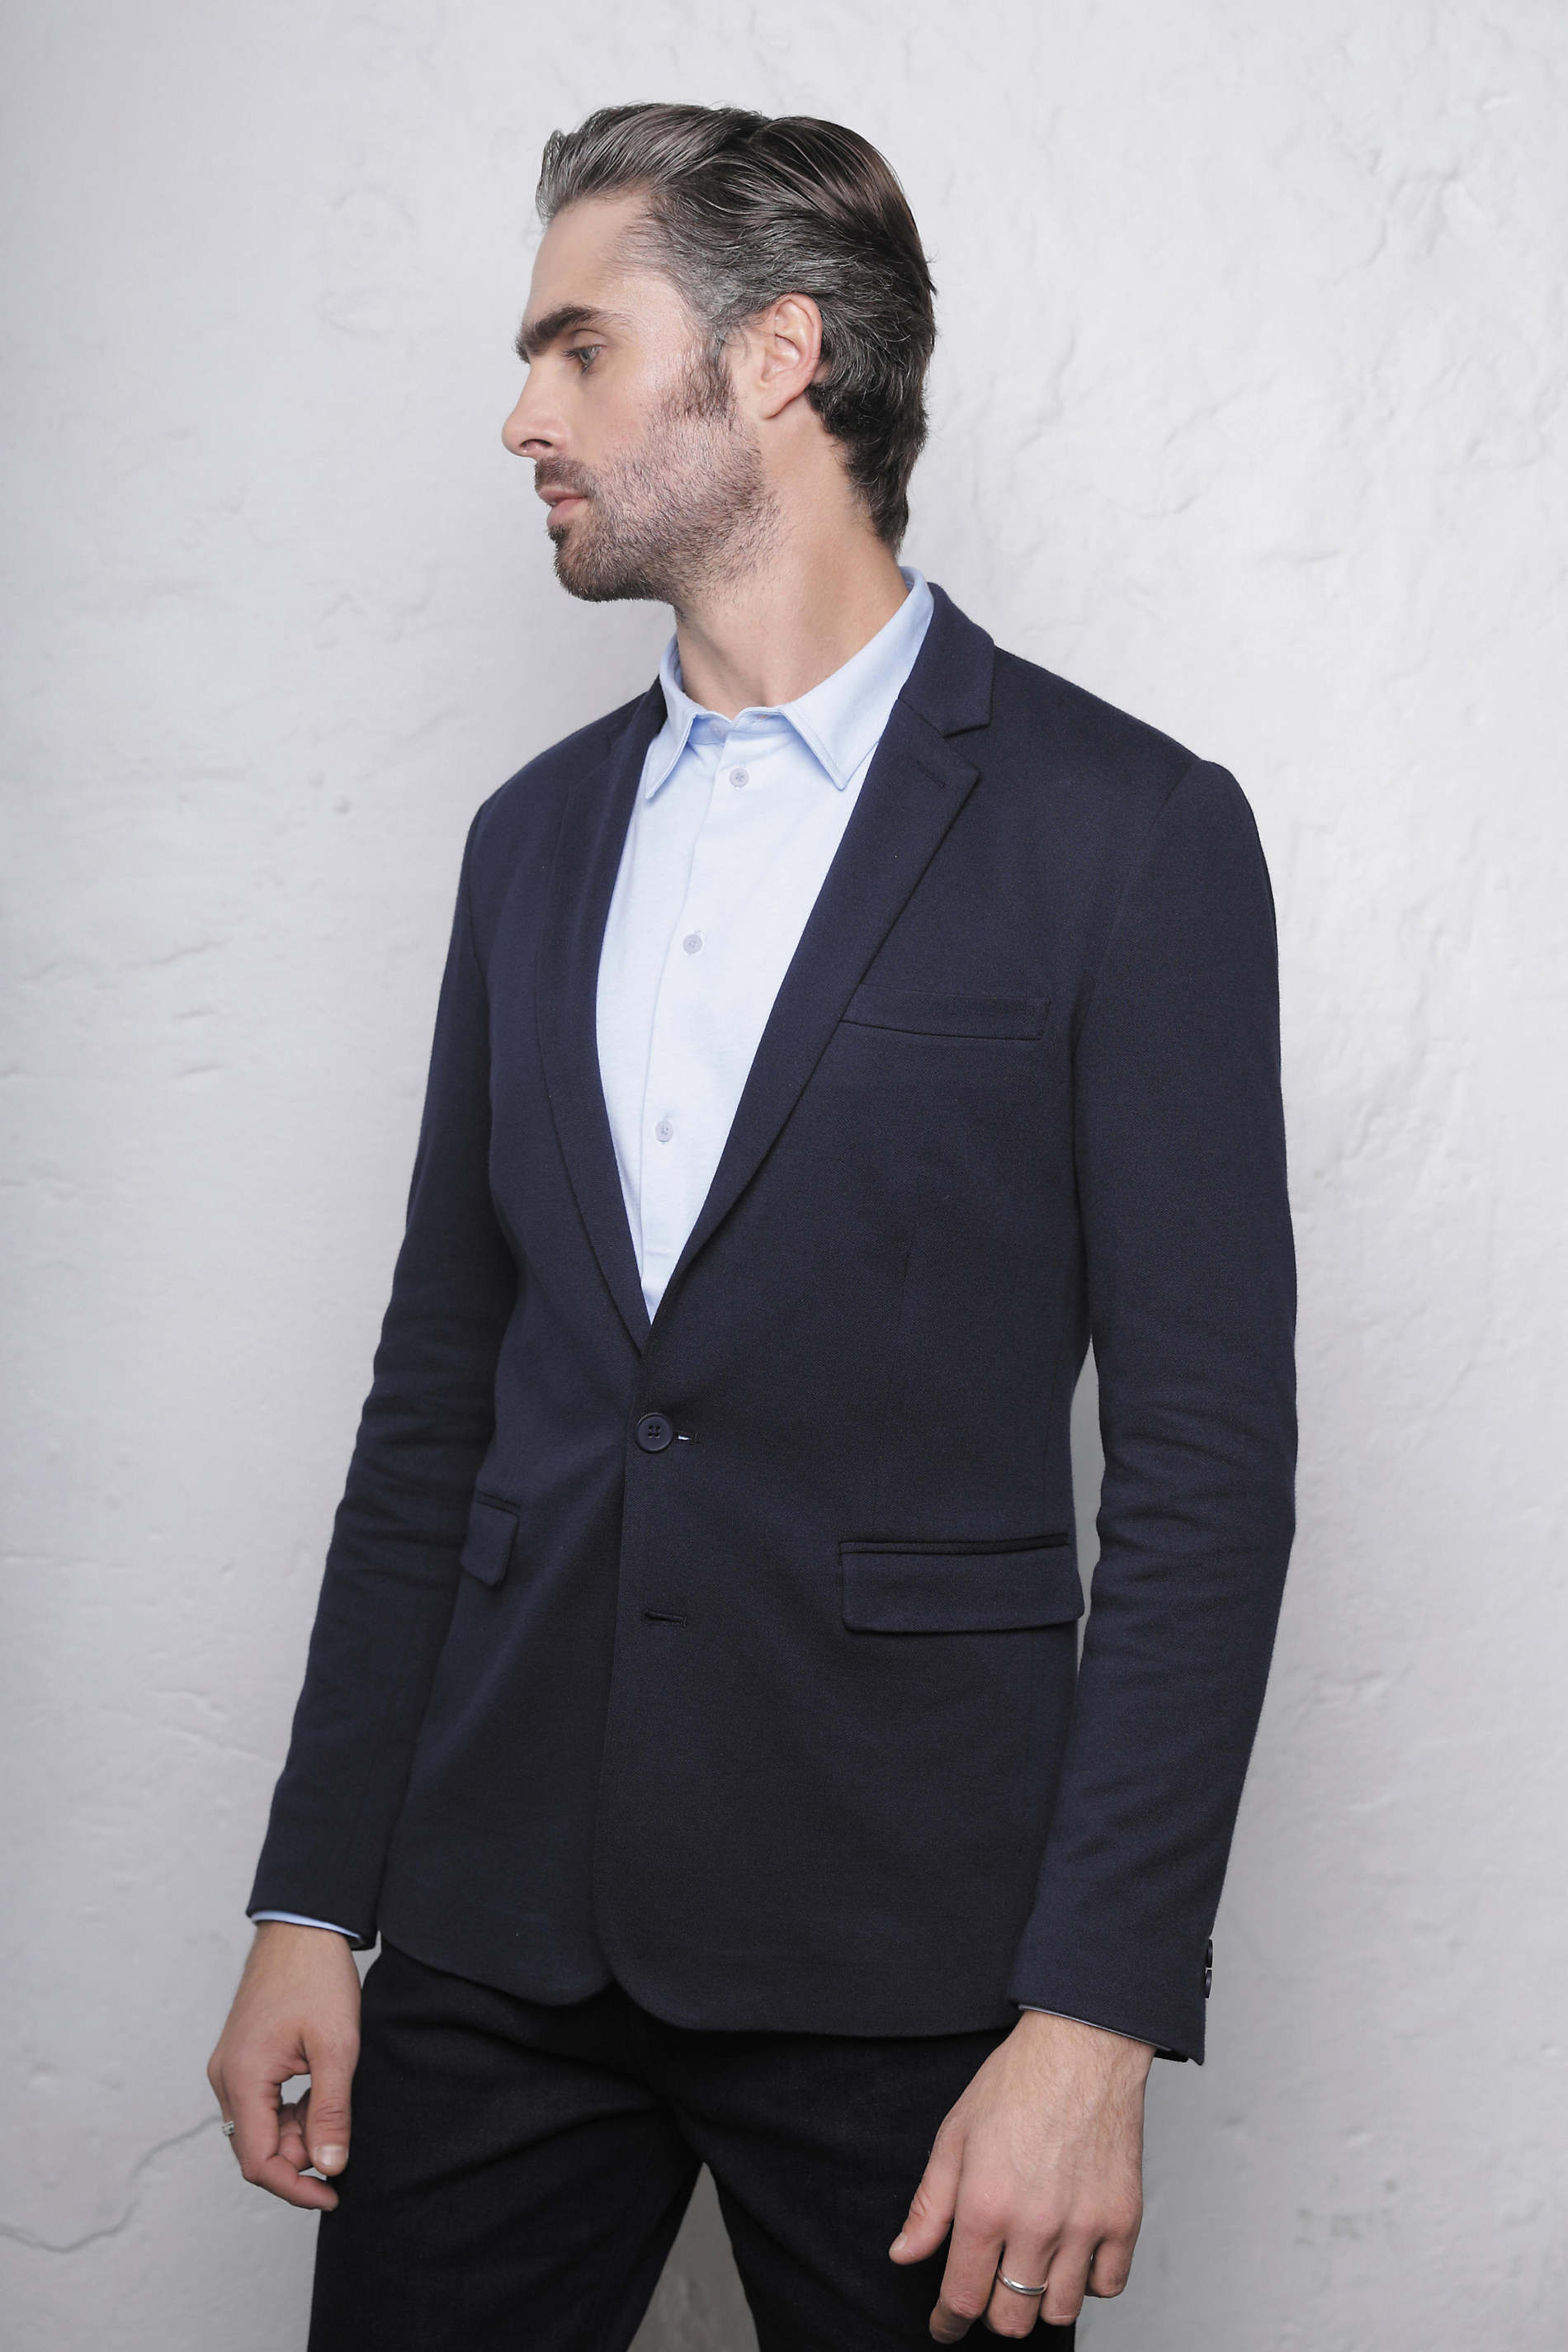 MEN'S PIQUÉ BLAZER<p>This blazer combines the formal chic of the suit jacket with the comfort of the piqué knit fabric.<br />It is versatile as it can be worn with smart trousers for a classic look or with denims for a more casual style.</p> NEOBLU MARCEL MEN